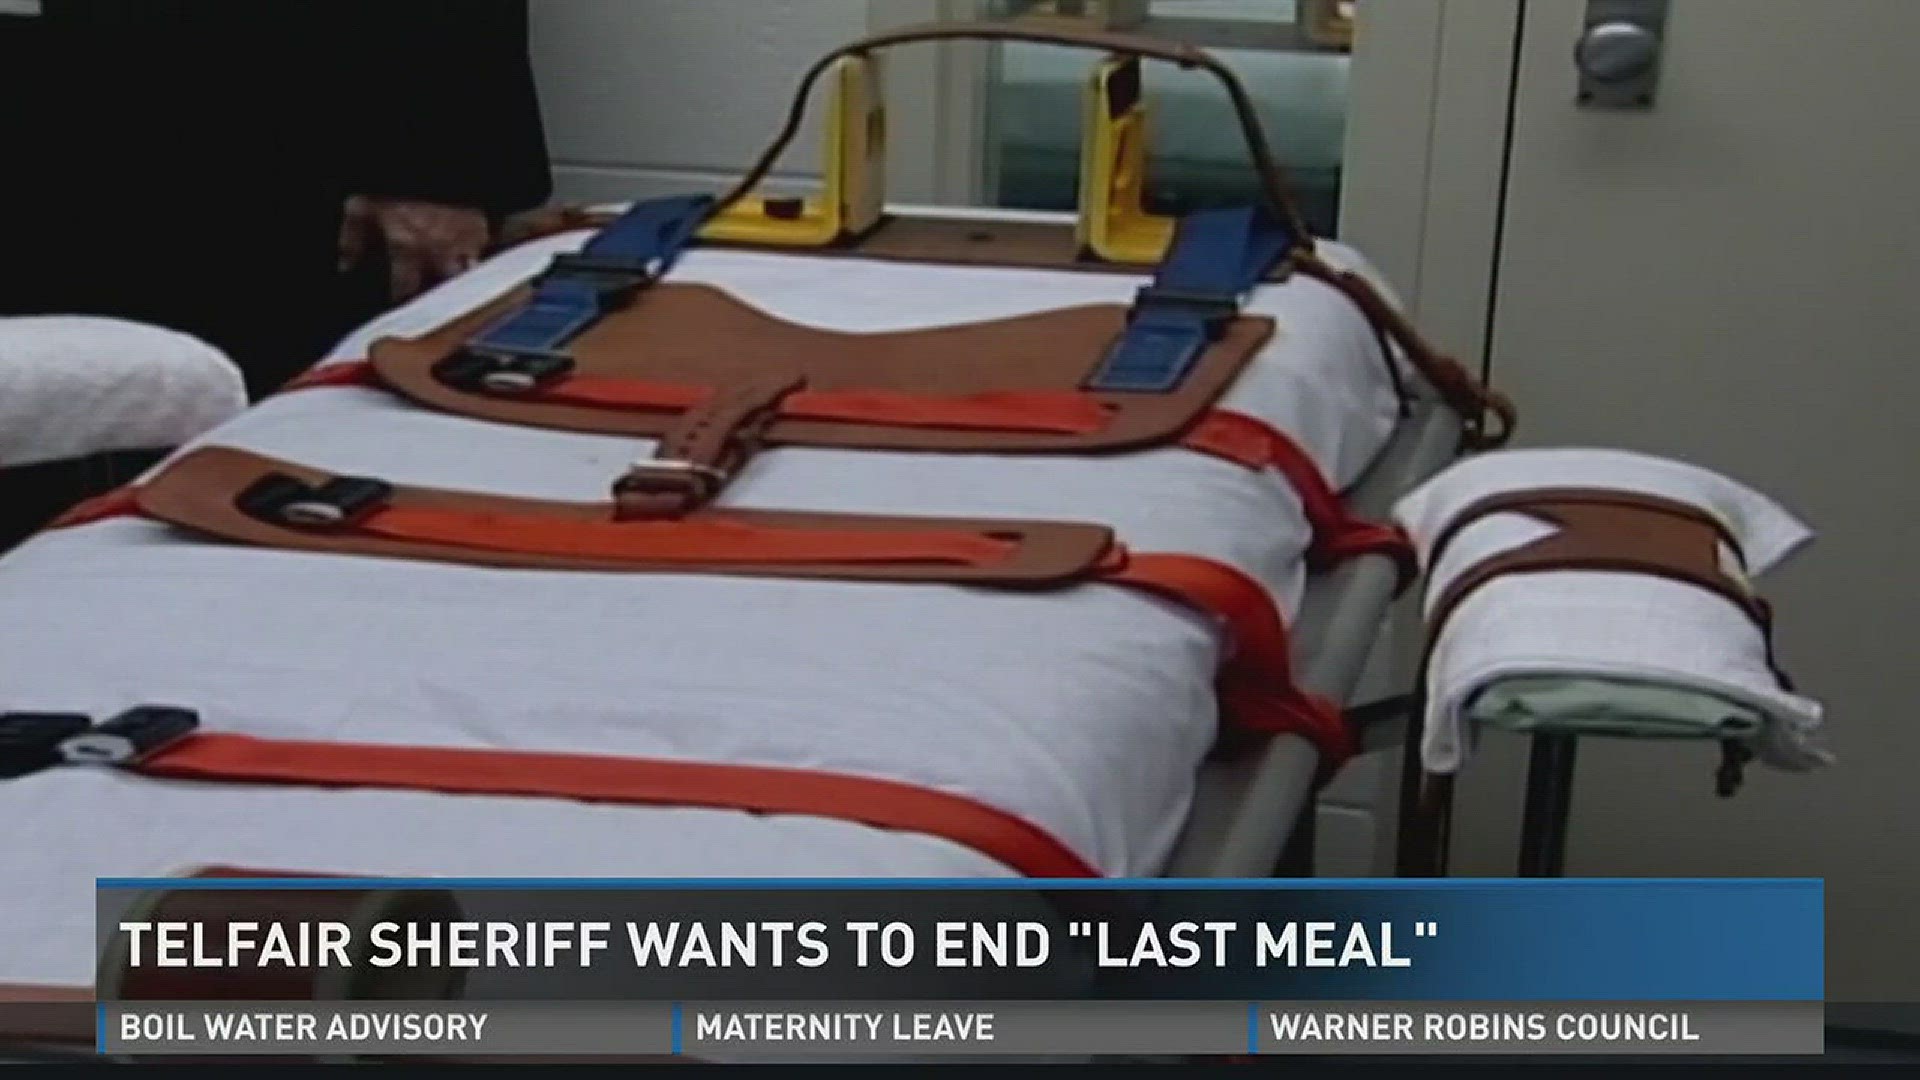 Telfair sheriff wants to end 'last meal'